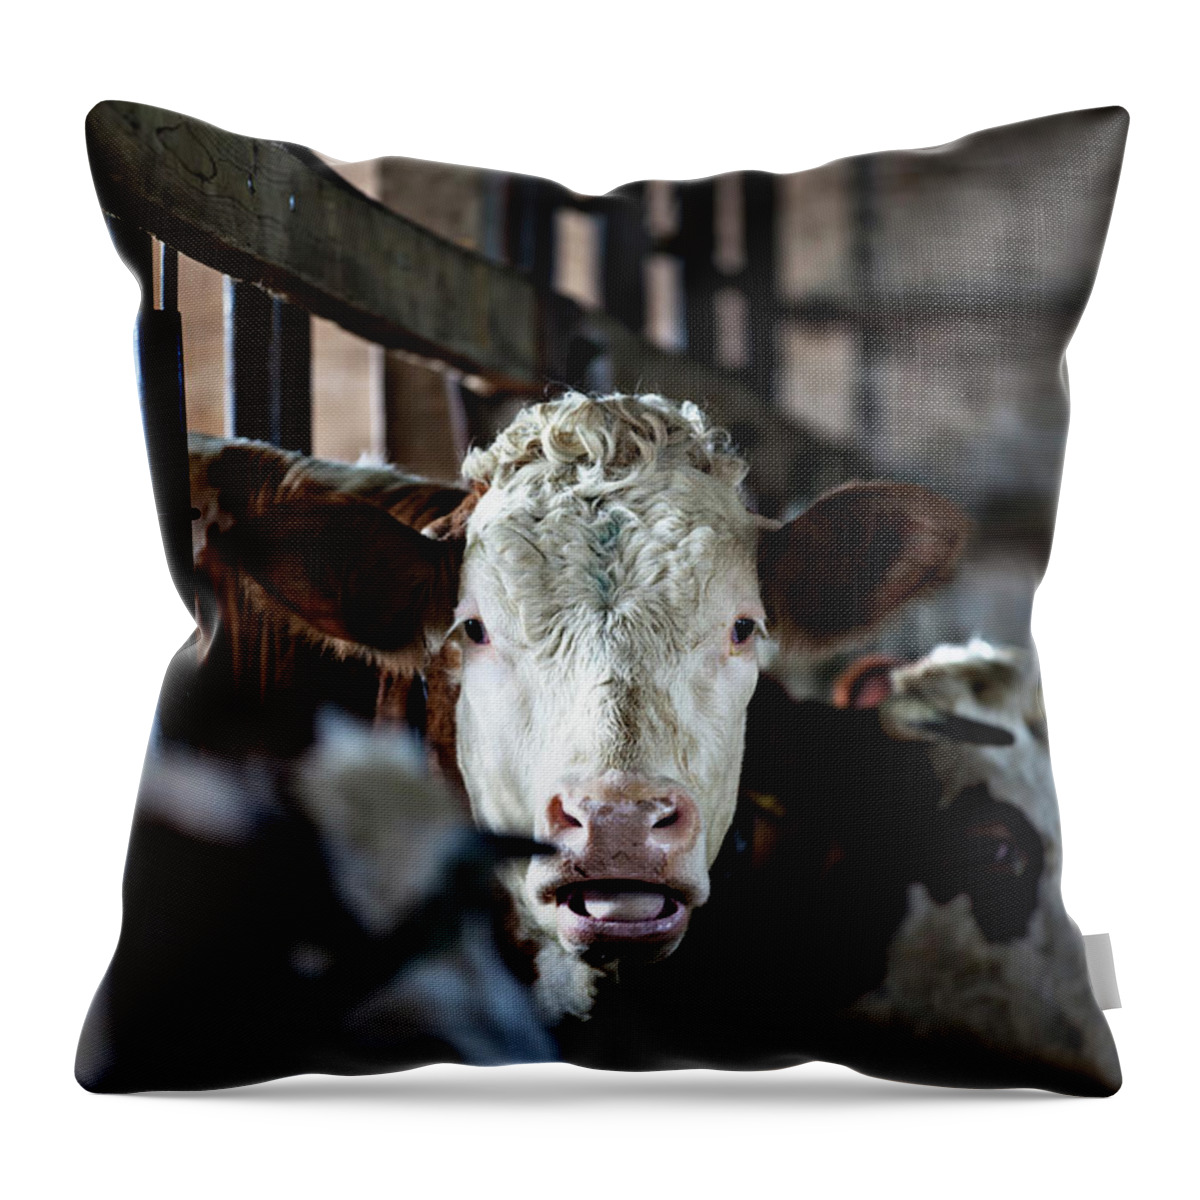 In A Row Throw Pillow featuring the photograph Cow In Old Stable by Opla